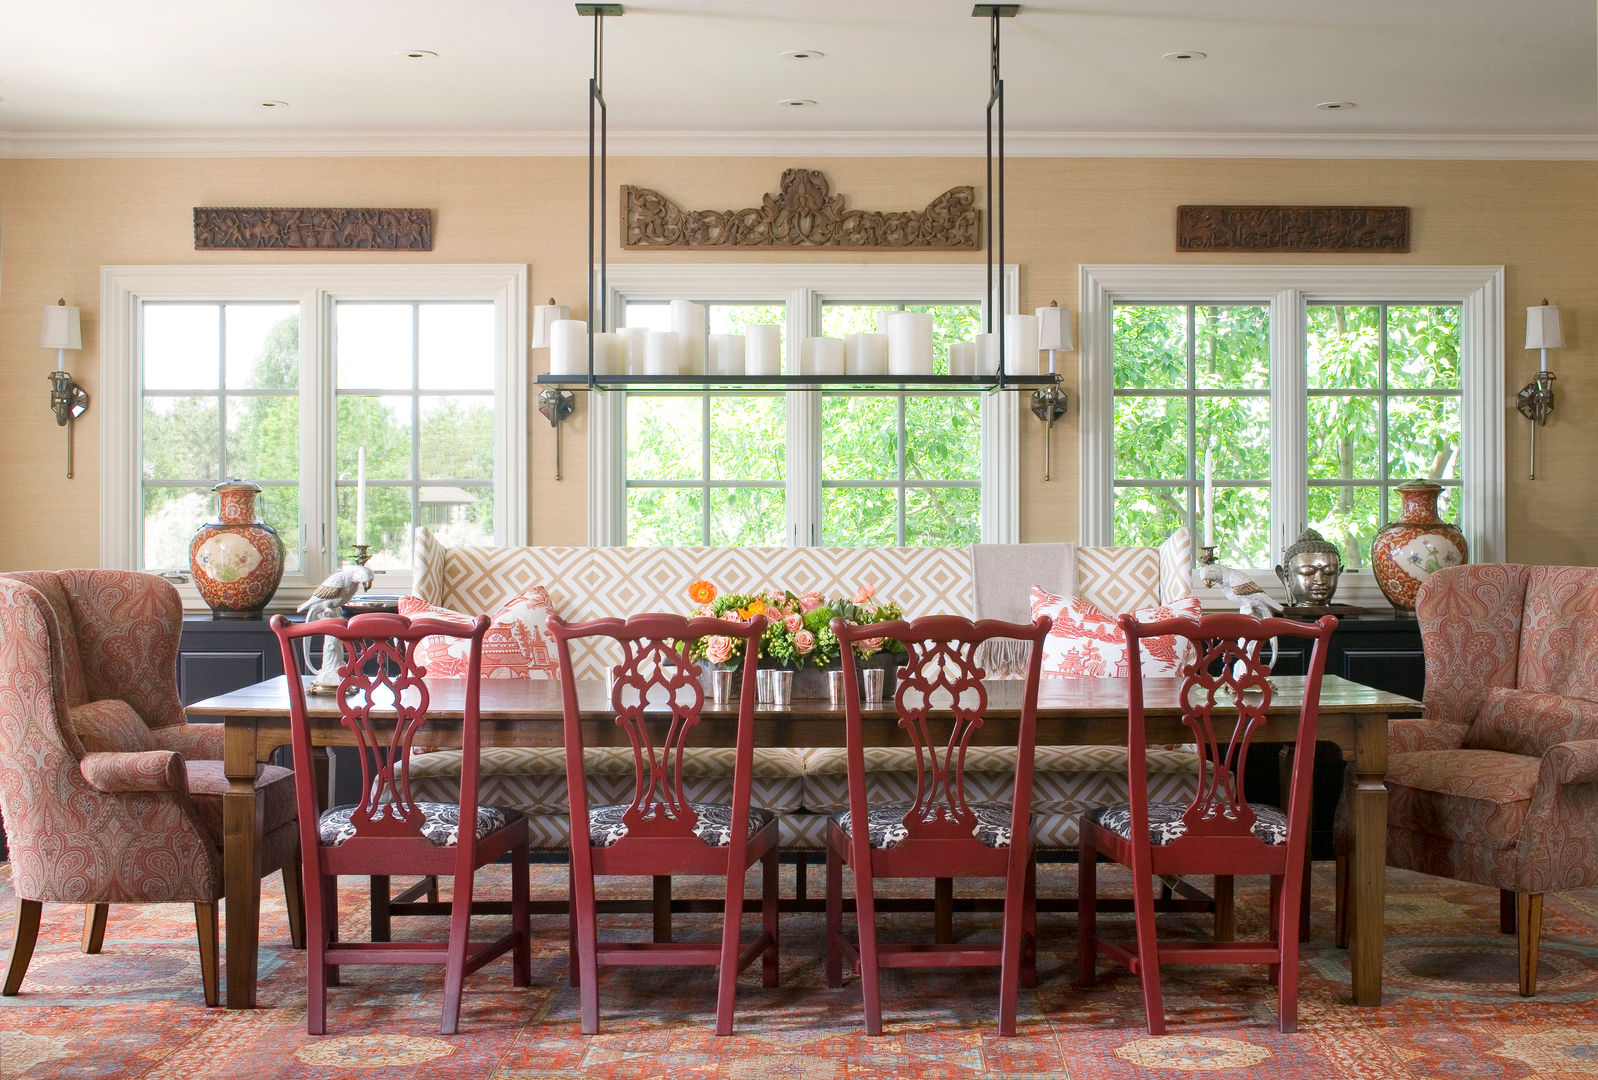 Home of the Year, Andrea Schumacher Interiors Andrea Schumacher Interiors غرفة السفرة